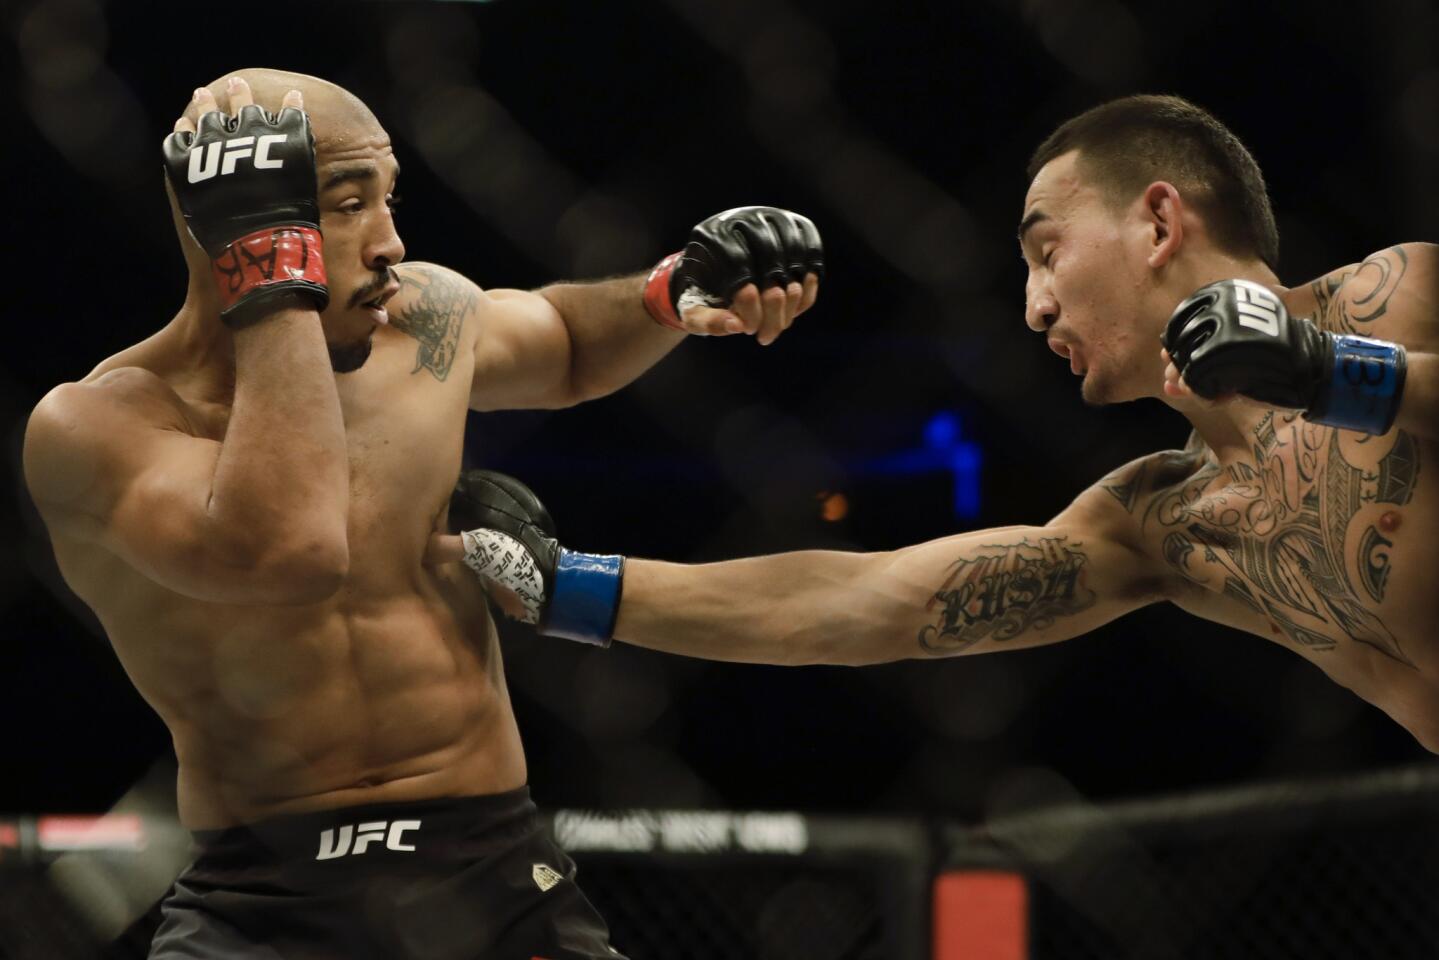 Jose Aldo, left, of Brazil, left, is hit by Max Holloway, of the United States, during their UFC featherweight mixed martial arts bout in Rio de Janeiro, Brazil, early Sunday, June 4, 2017. (AP Photo/Leo Correa)